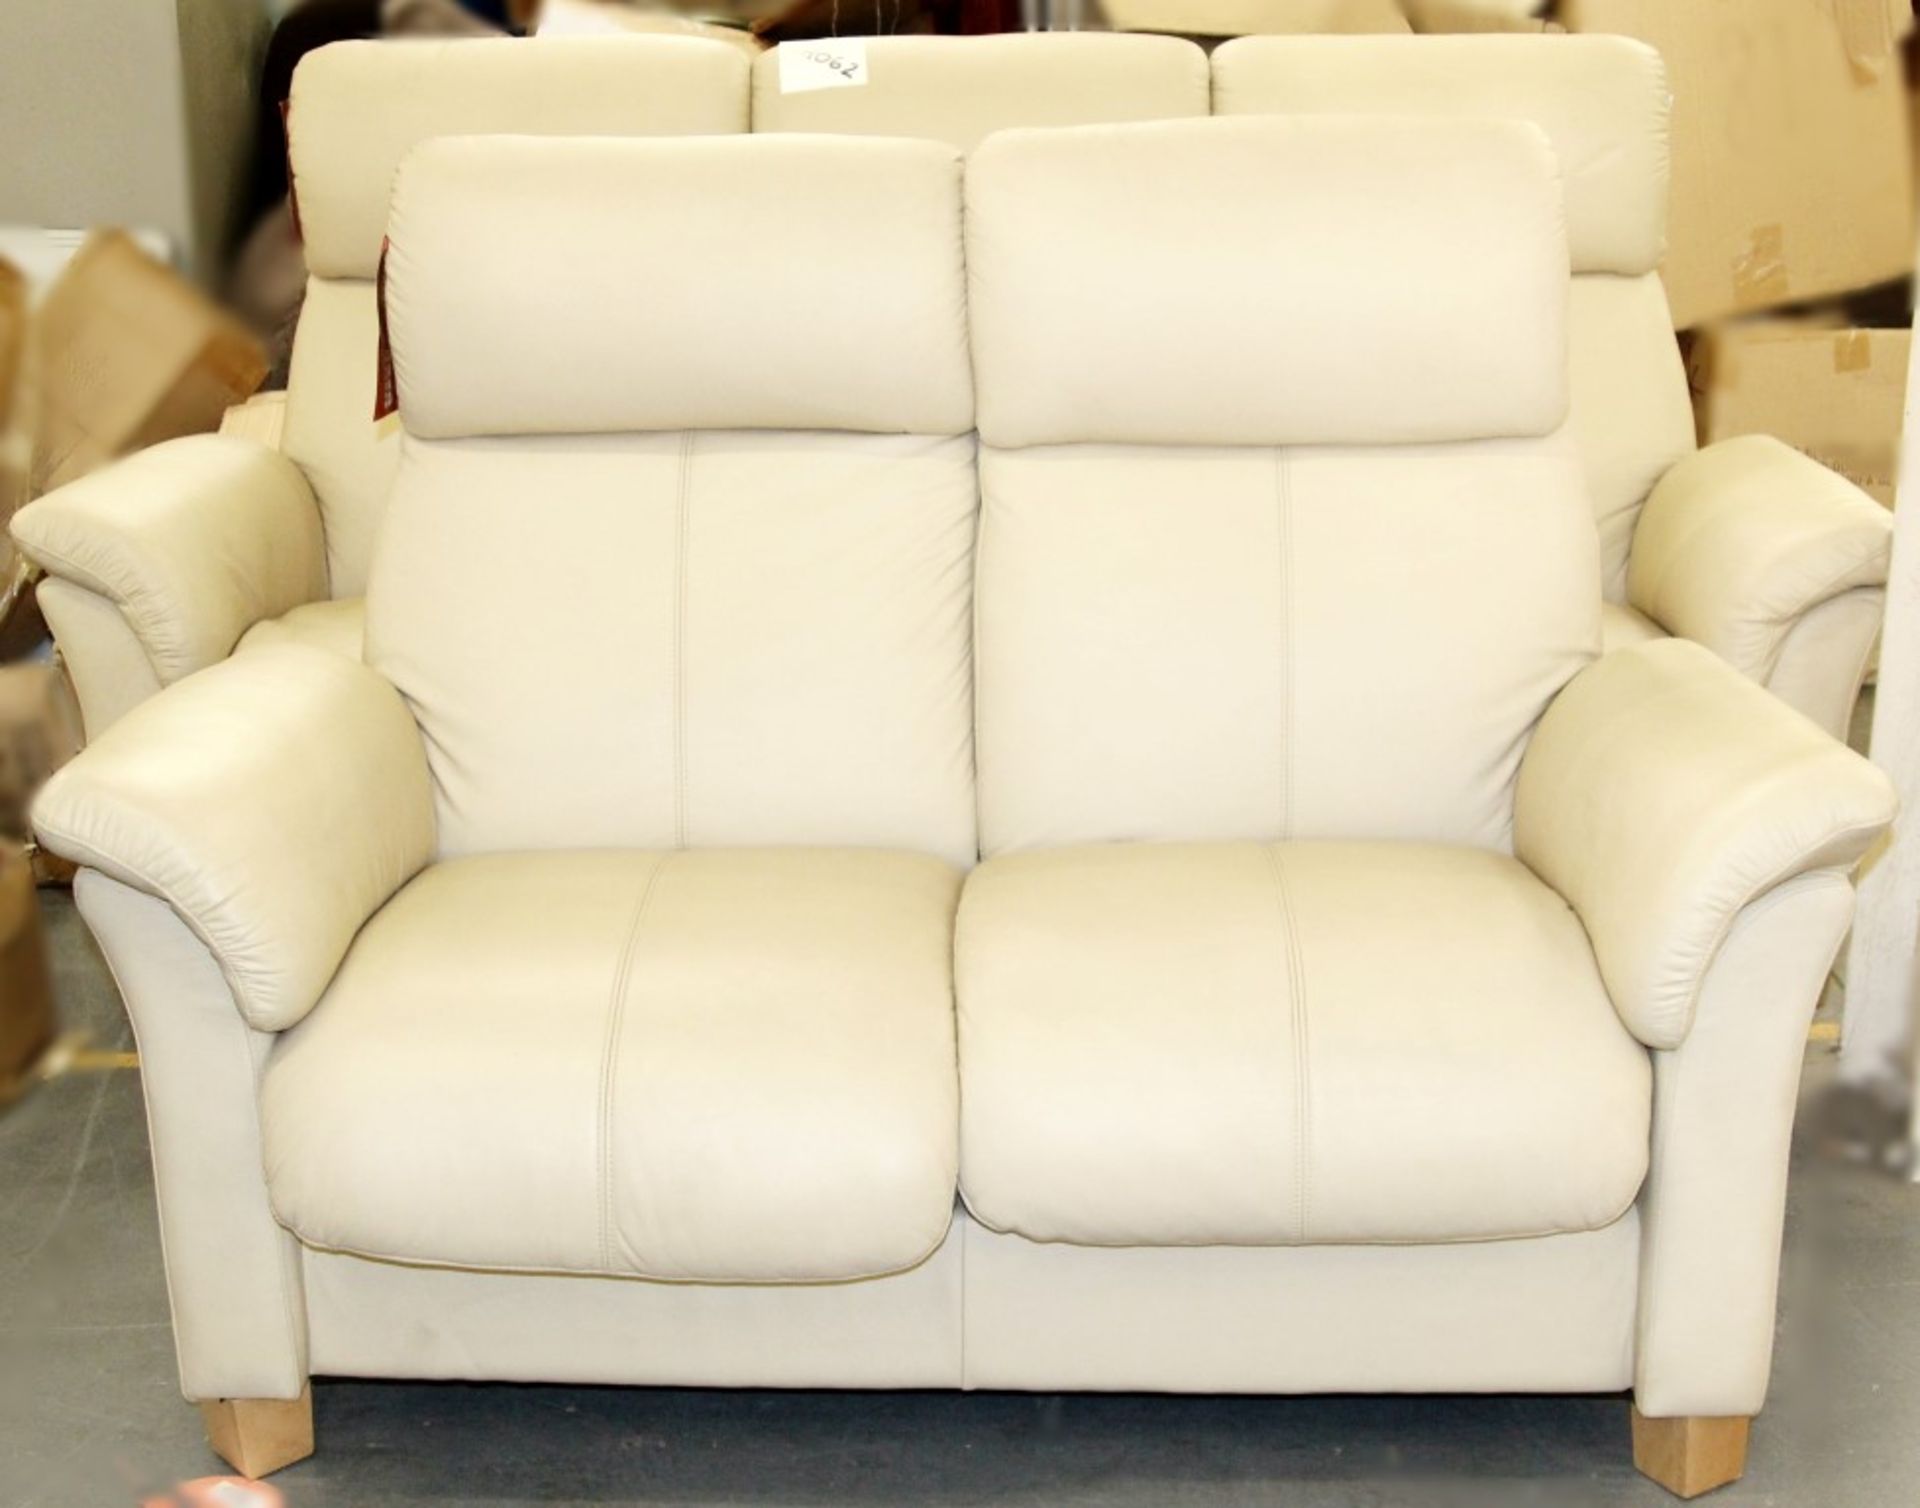 Ralaxateese Beige Leather Recliner 3 + 2 Seater Set - Ref CH062 – RRP £3,600 - Ex Display Stock In